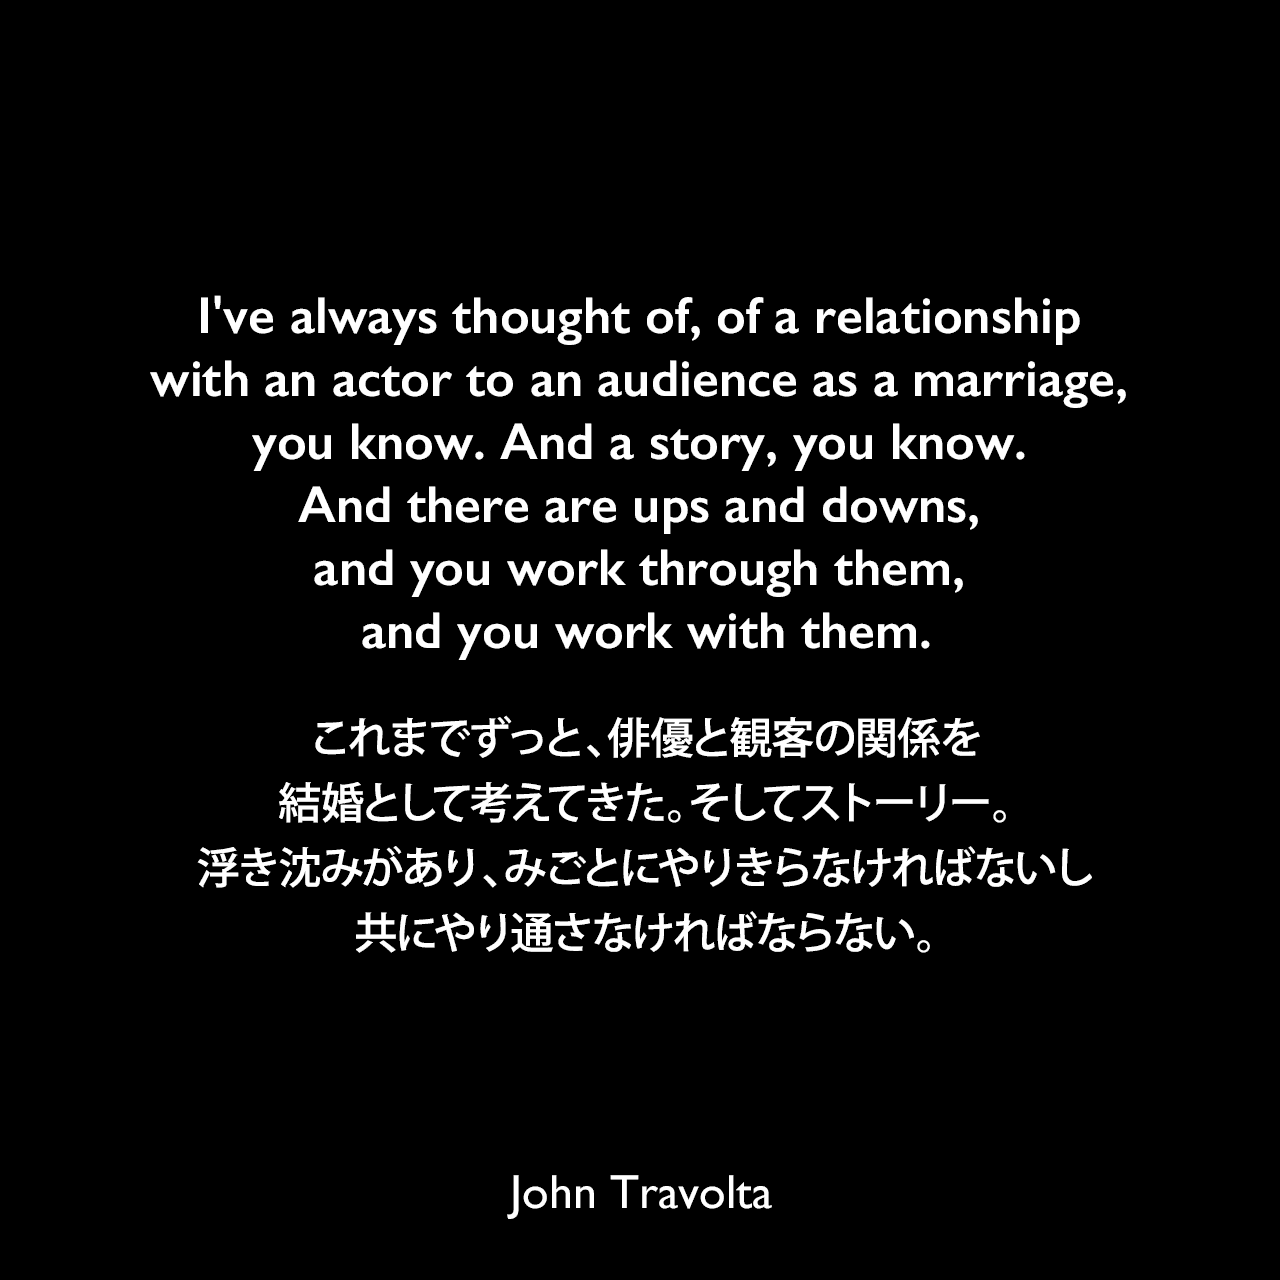 I've always thought of, of a relationship with an actor to an audience as a marriage, you know. And a story, you know. And there are ups and downs, and you work through them, and you work with them.これまでずっと、俳優と観客の関係を結婚として考えてきた。そしてストーリー。浮き沈みがあり、みごとにやりきらなければないし共にやり通さなければならない。John Travolta